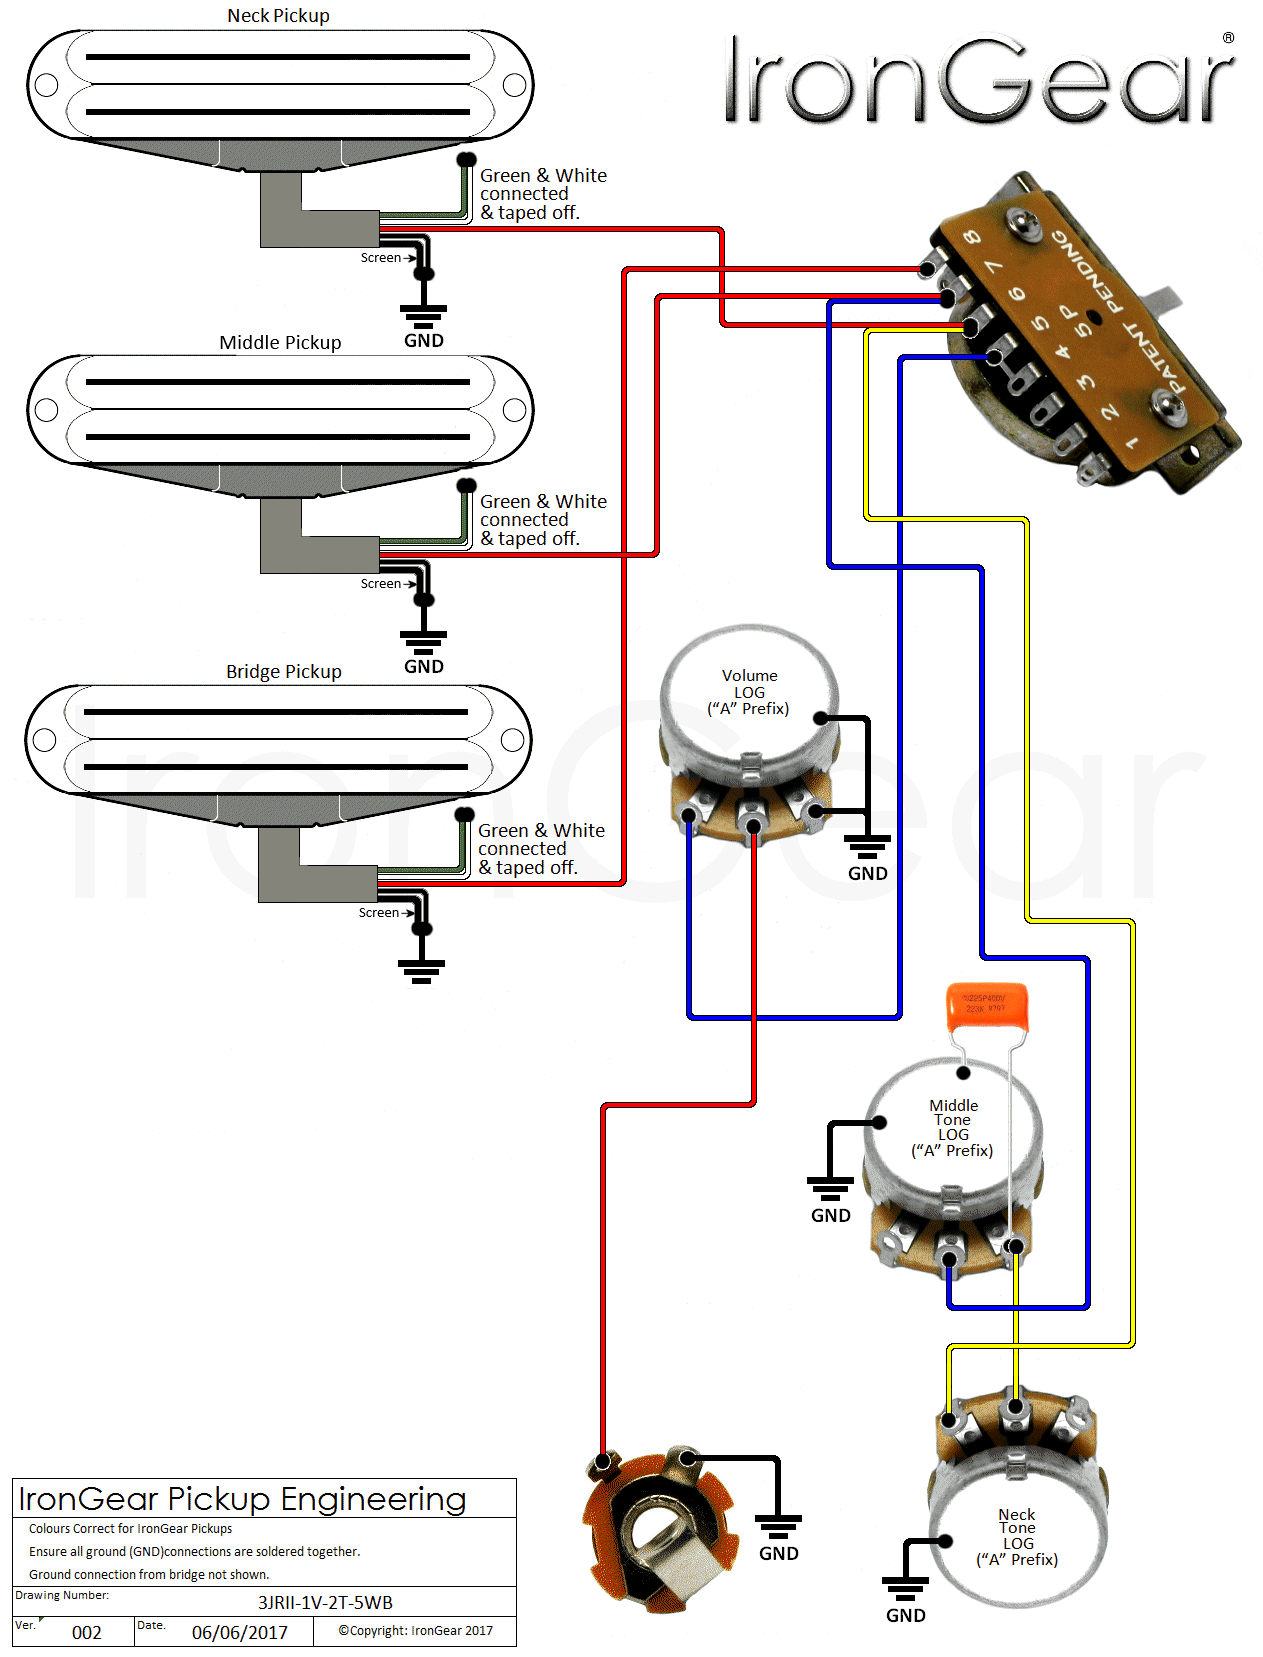 Wiring Diagram For Hsh Strat With 5 Way Switch from www.irongear.co.uk